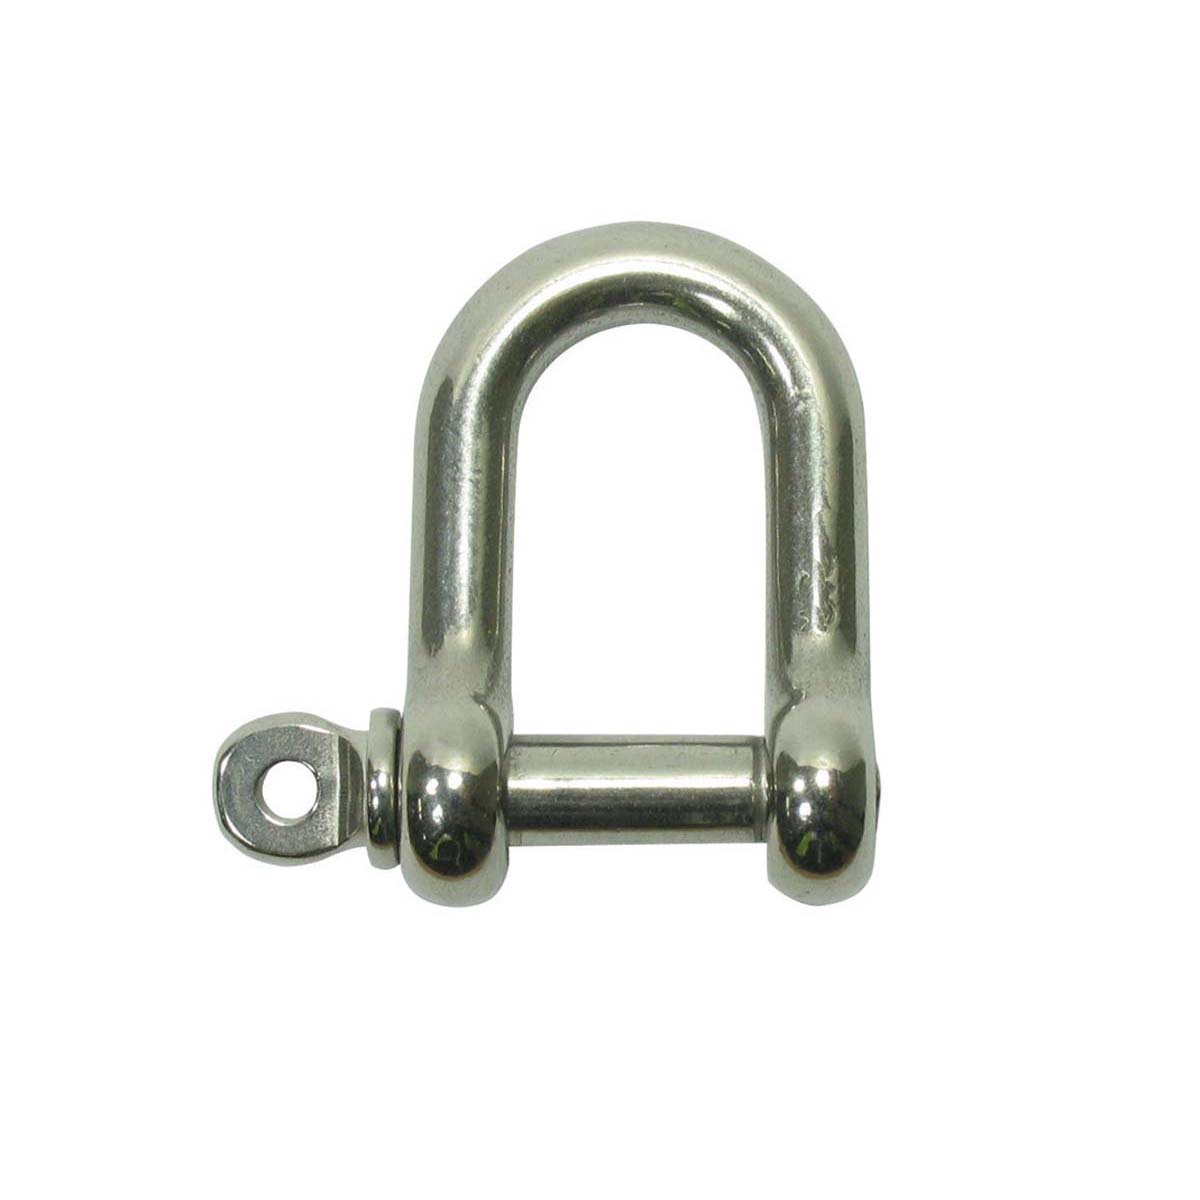 Blueline Stainless Steel D Shackle 6mm